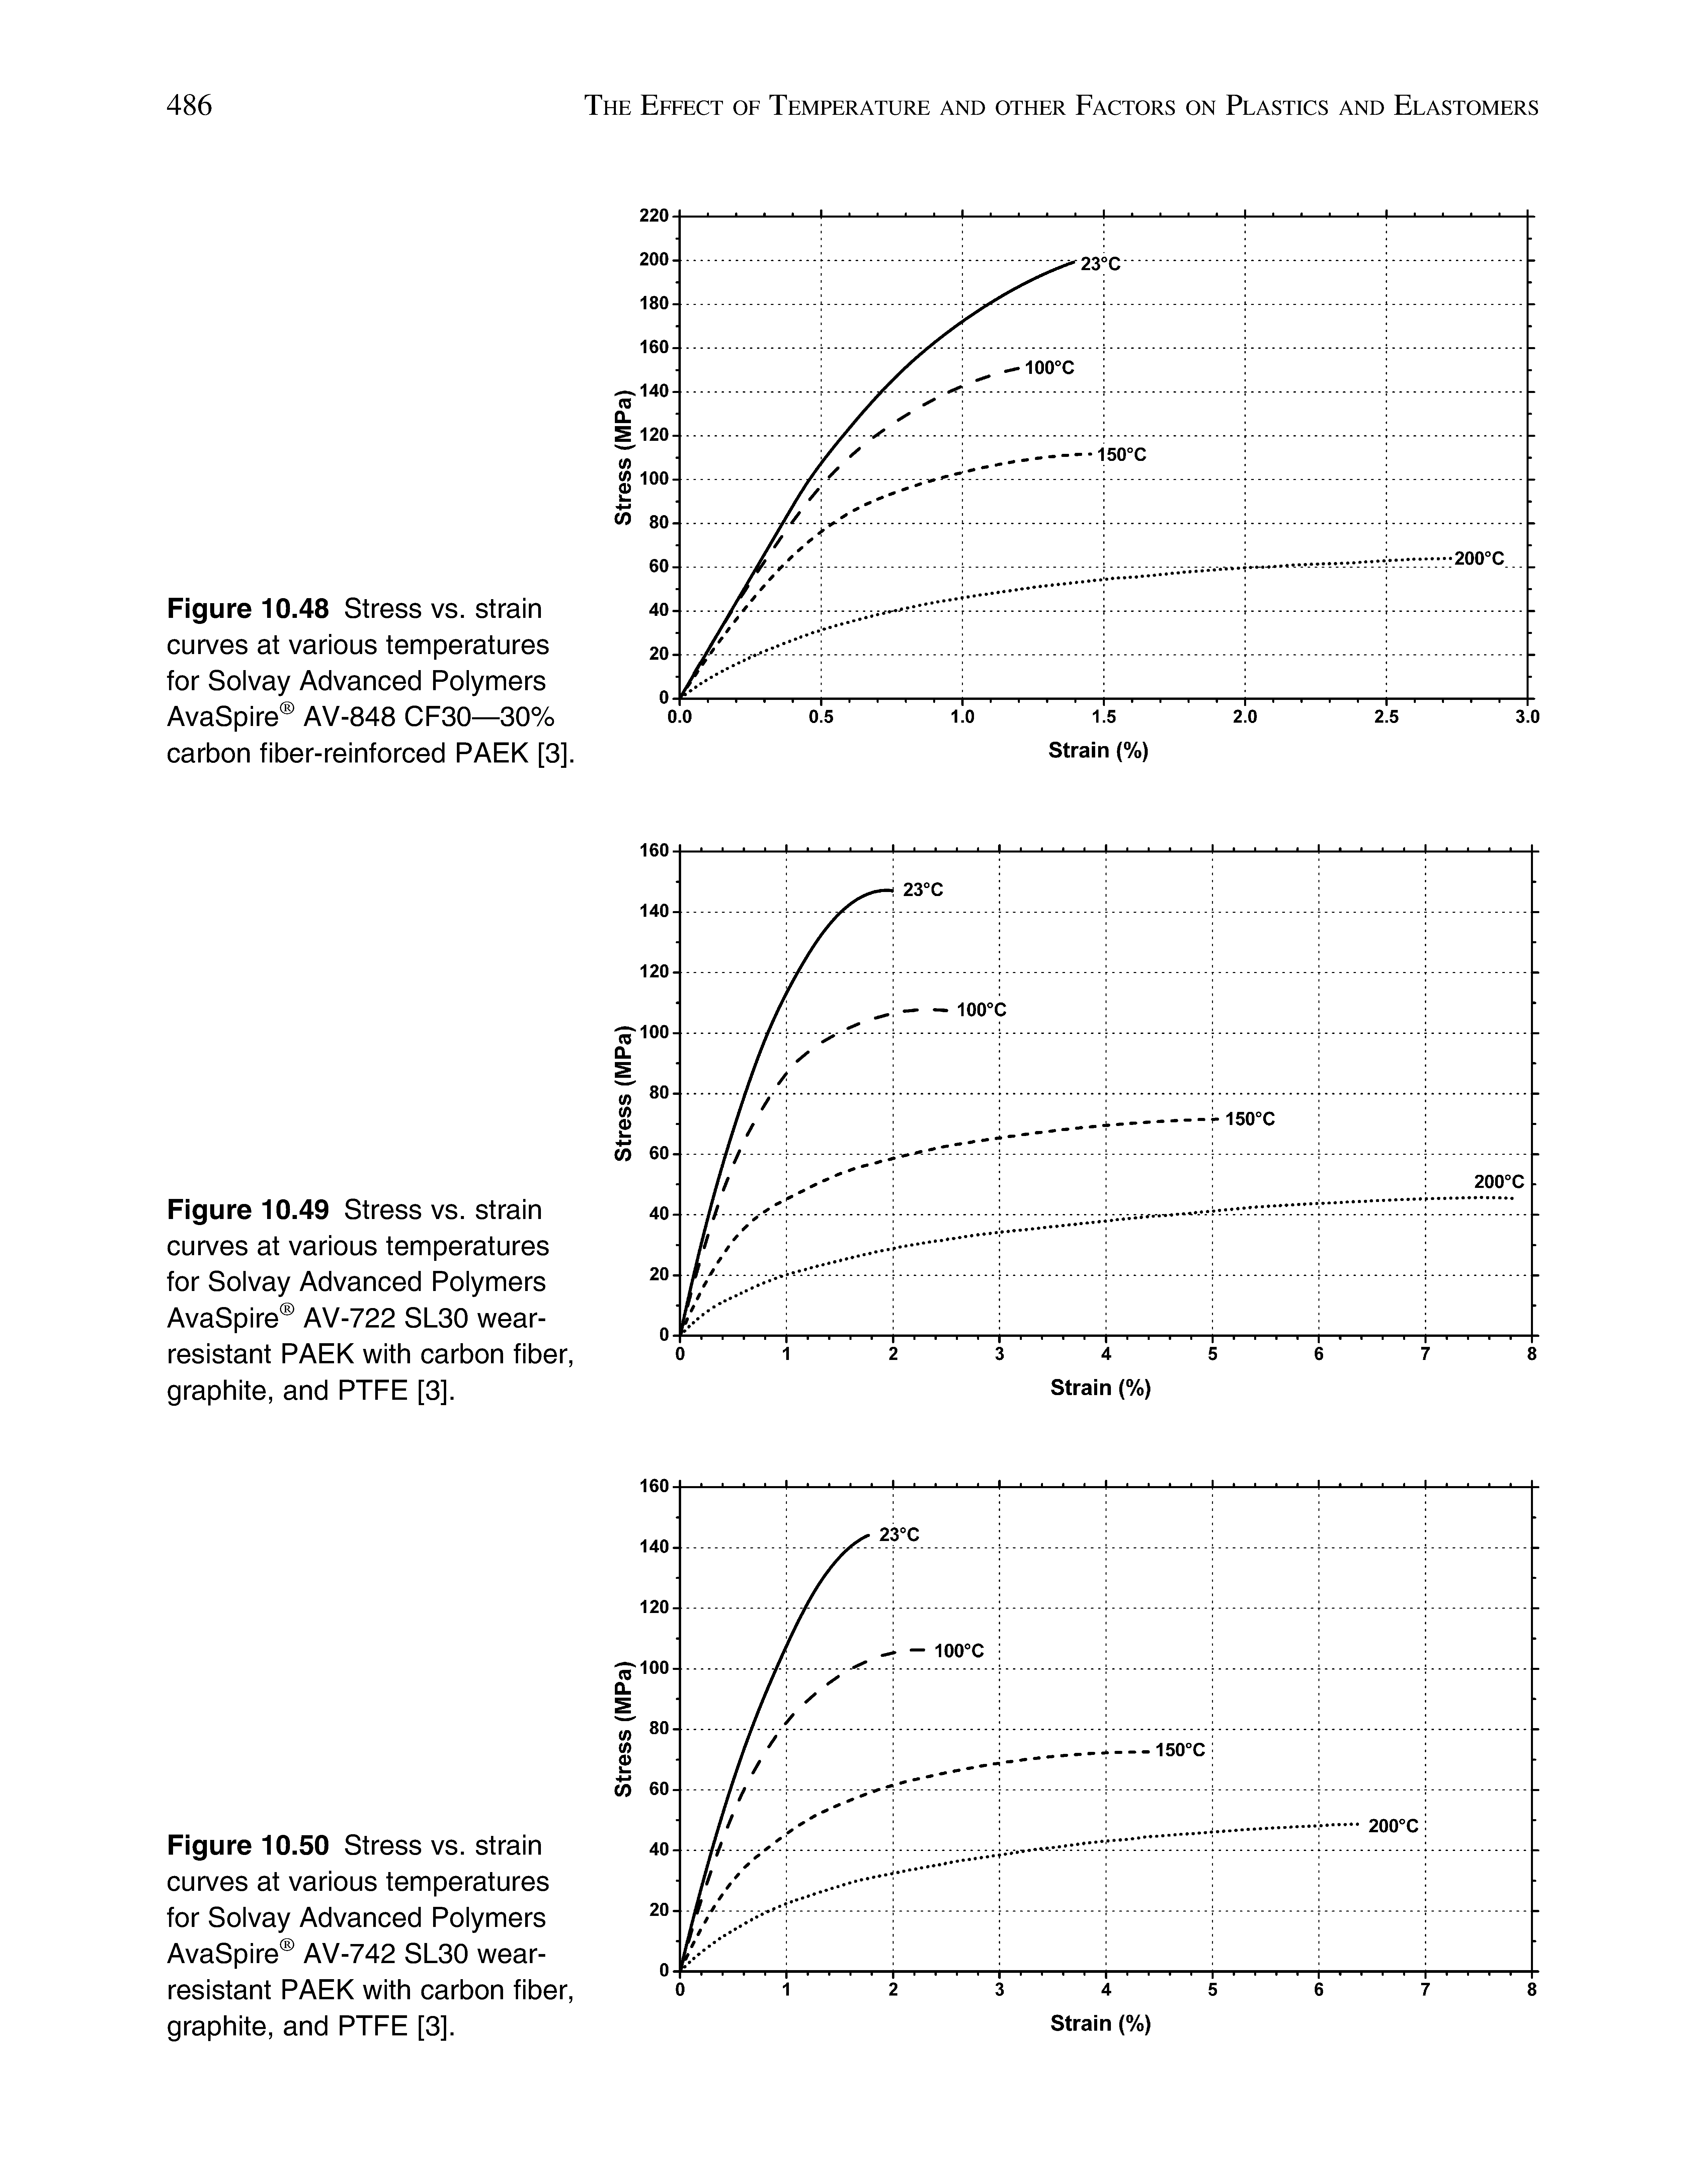 Figure 10.49 Stress vs. strain curves at various temperatures for Soivay Advanced Polymers AvaSpire AV-722 SL30 wear-resistant PAEK with carbon fiber, graphite, and PTFE [3].